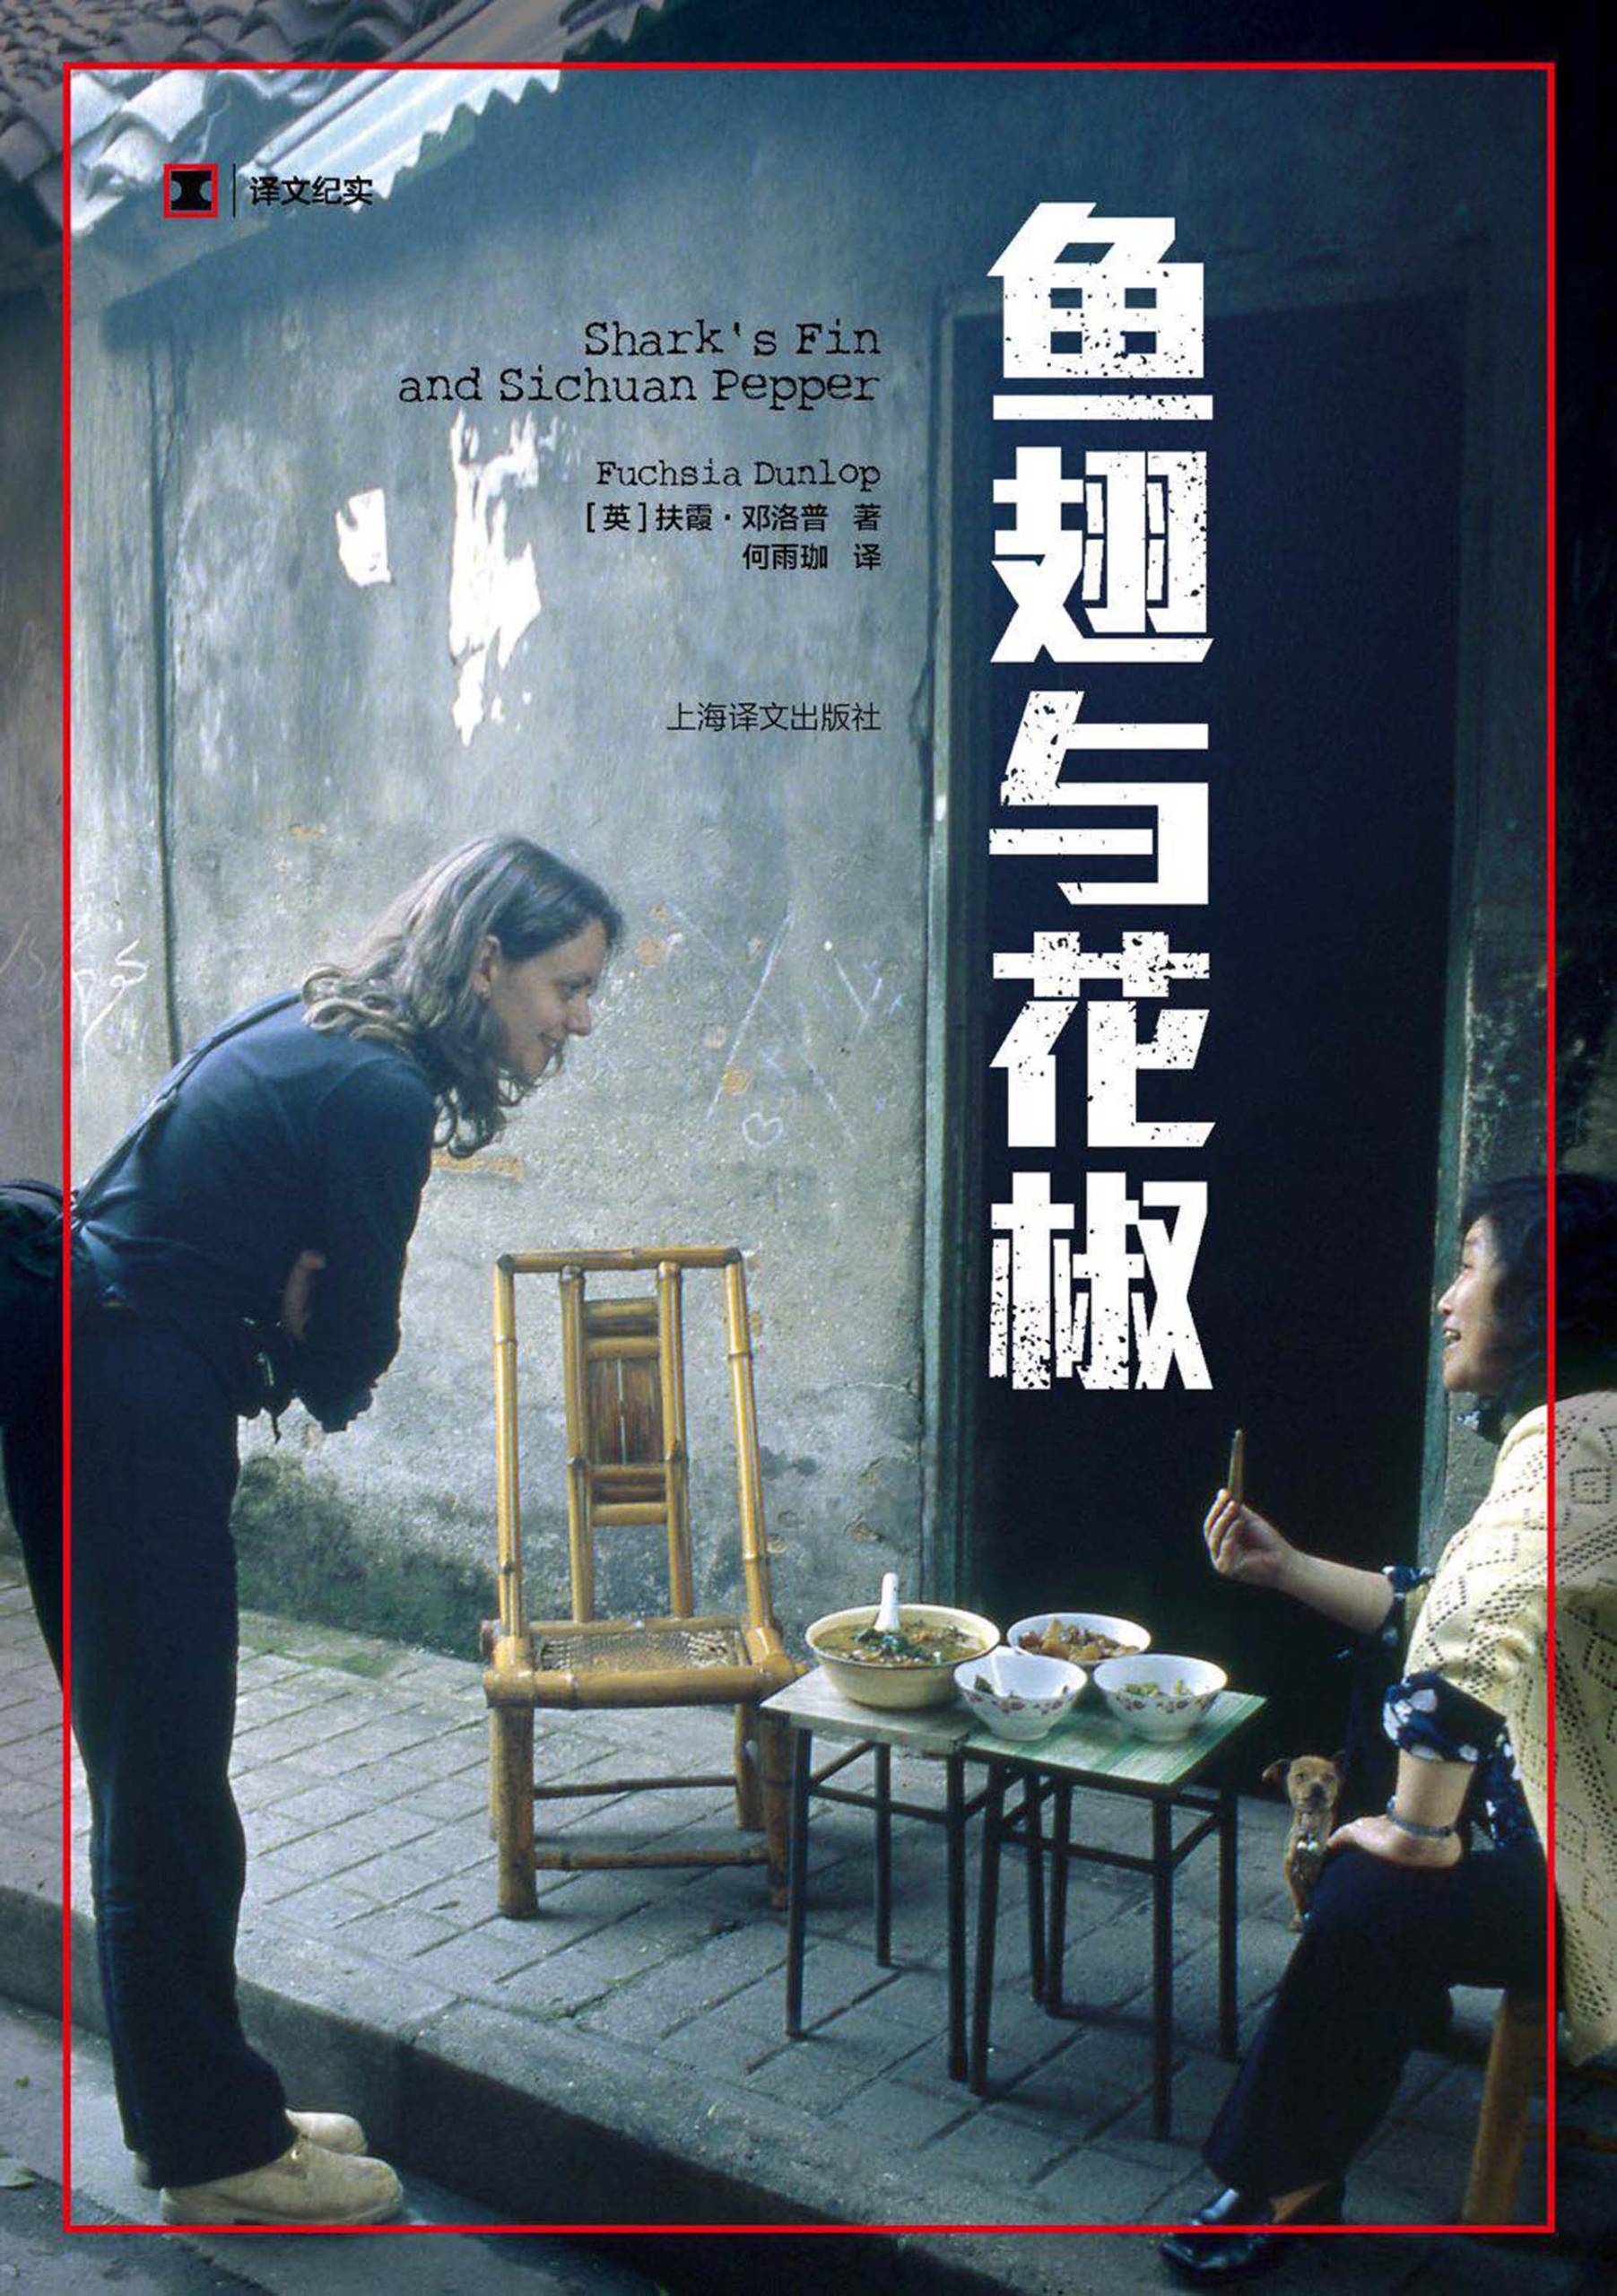 The Chinese-language book jacket for the book 'Shark's Fin and Sichuan Pepper' depicts a woman bending down to talk to a Chinese woman seated in front of several bowls of soup.